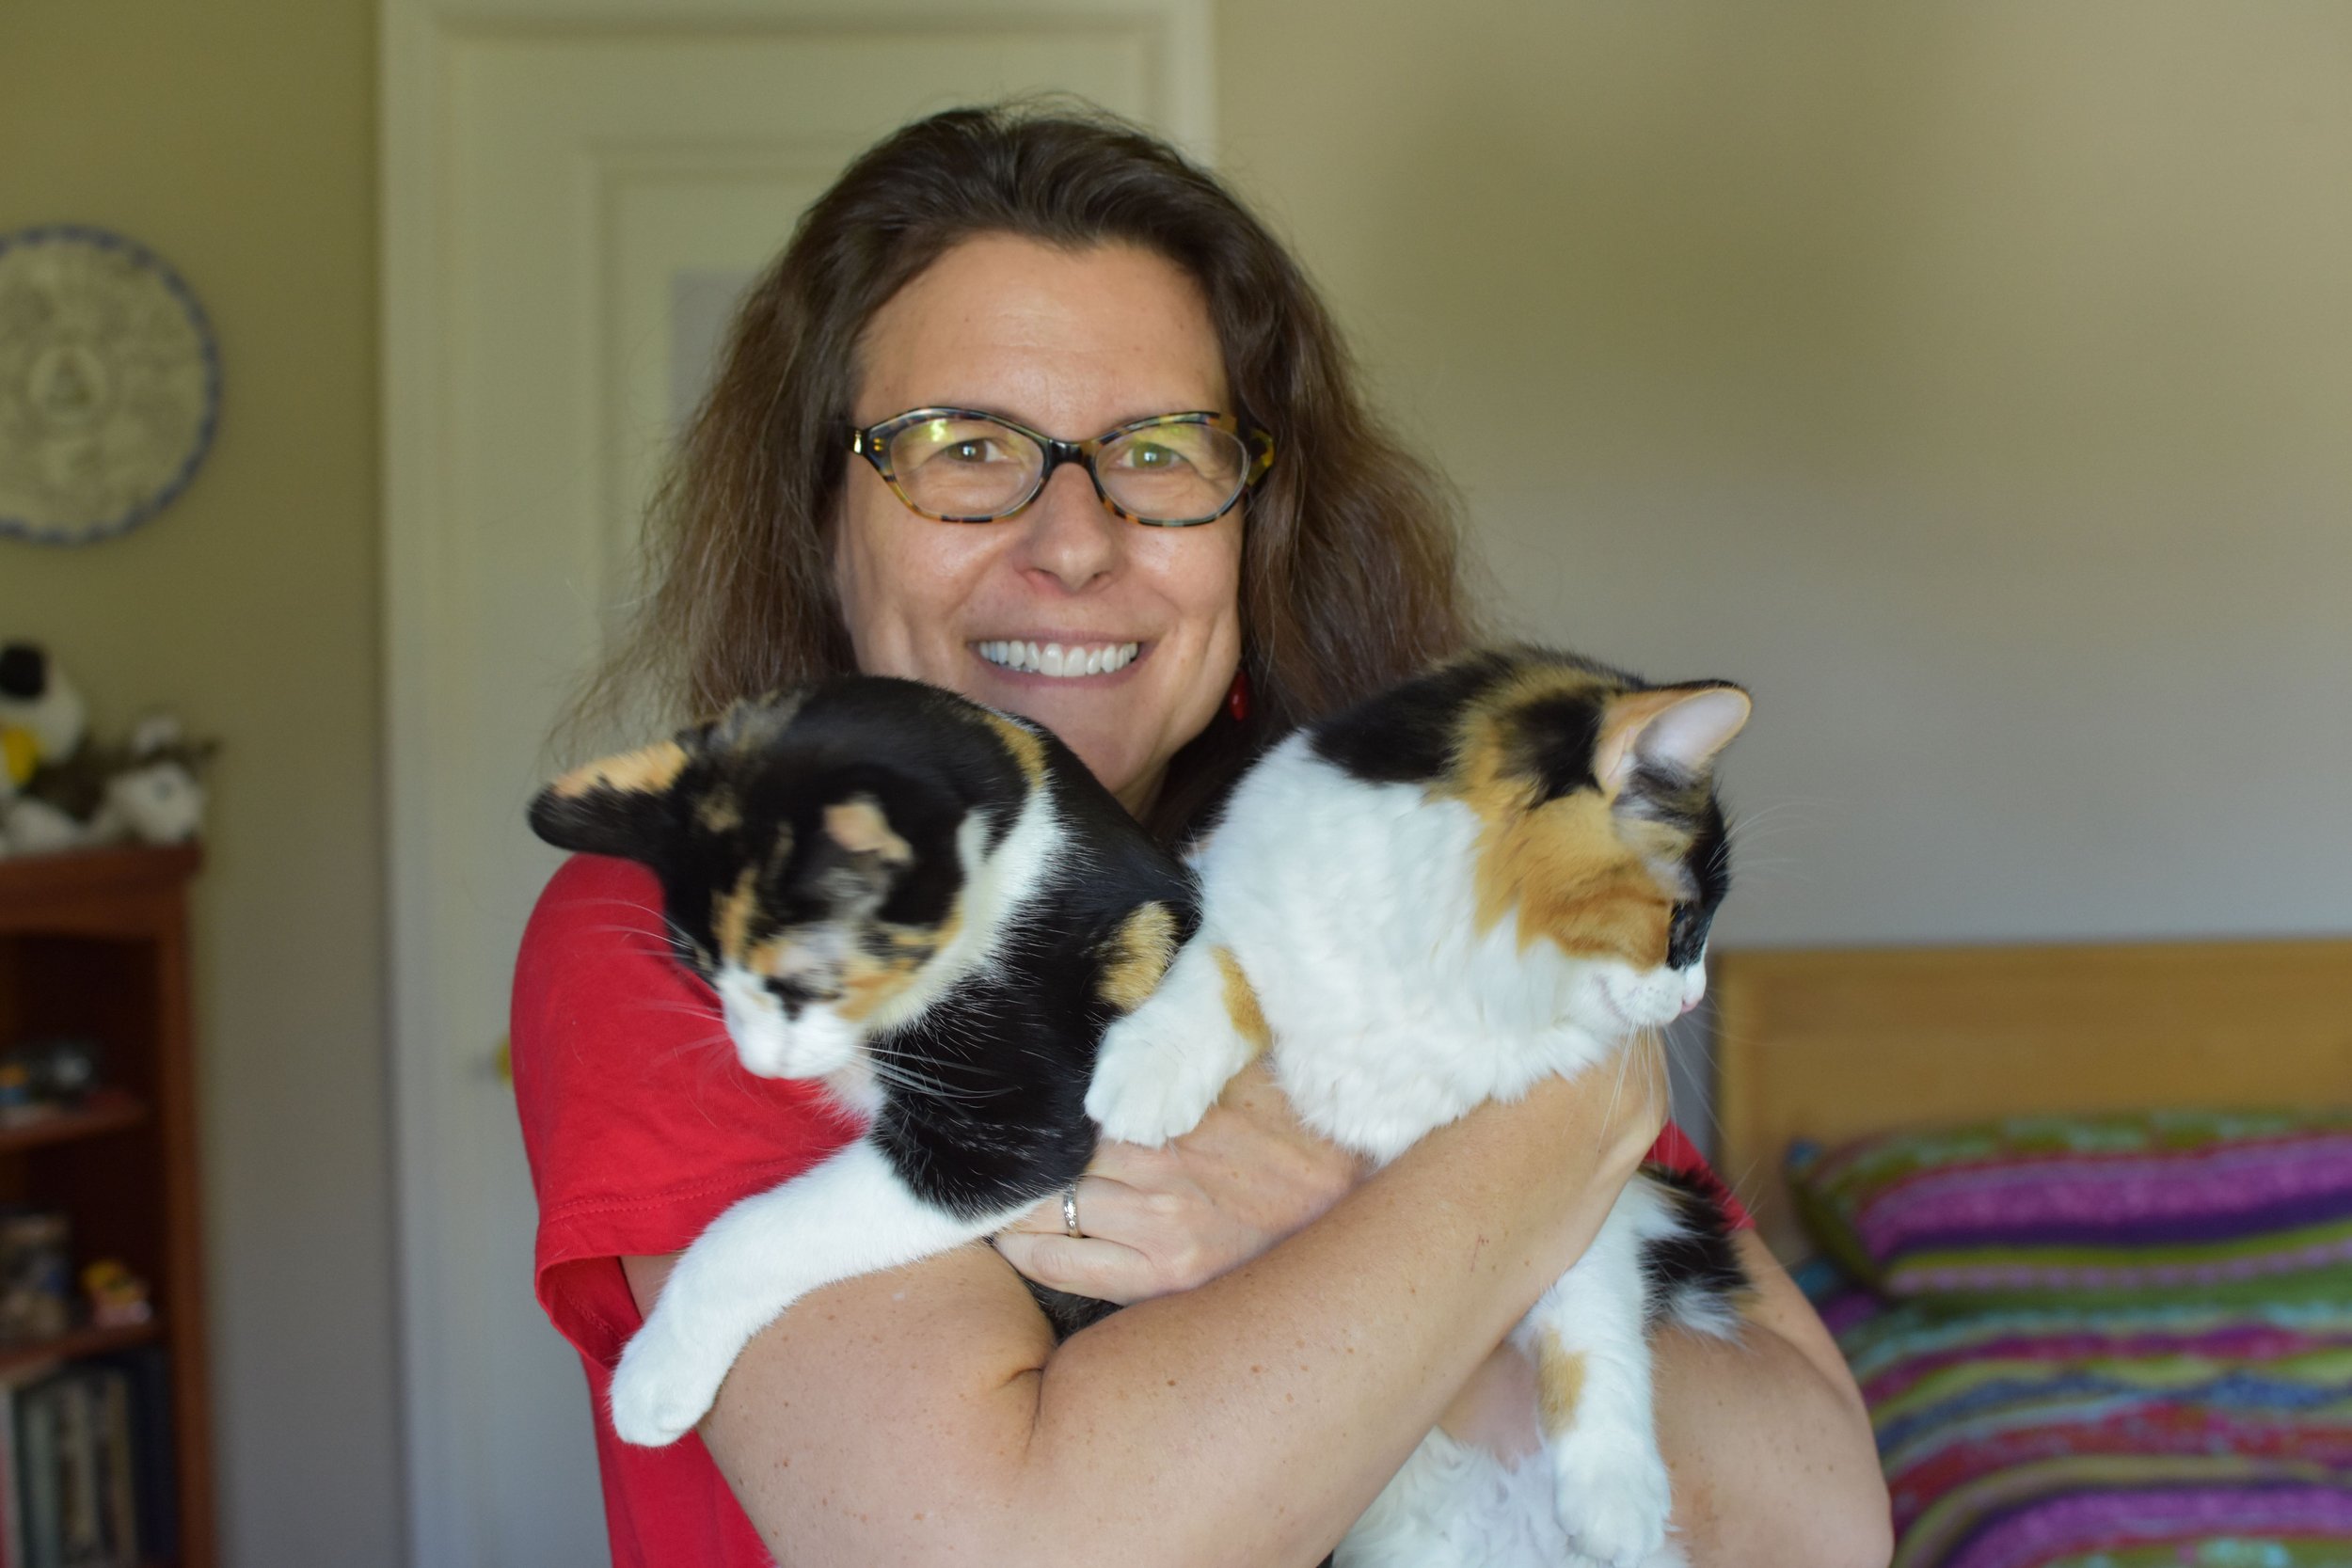 SM Photo Stacey Freedenthal WITH CATS.jpg